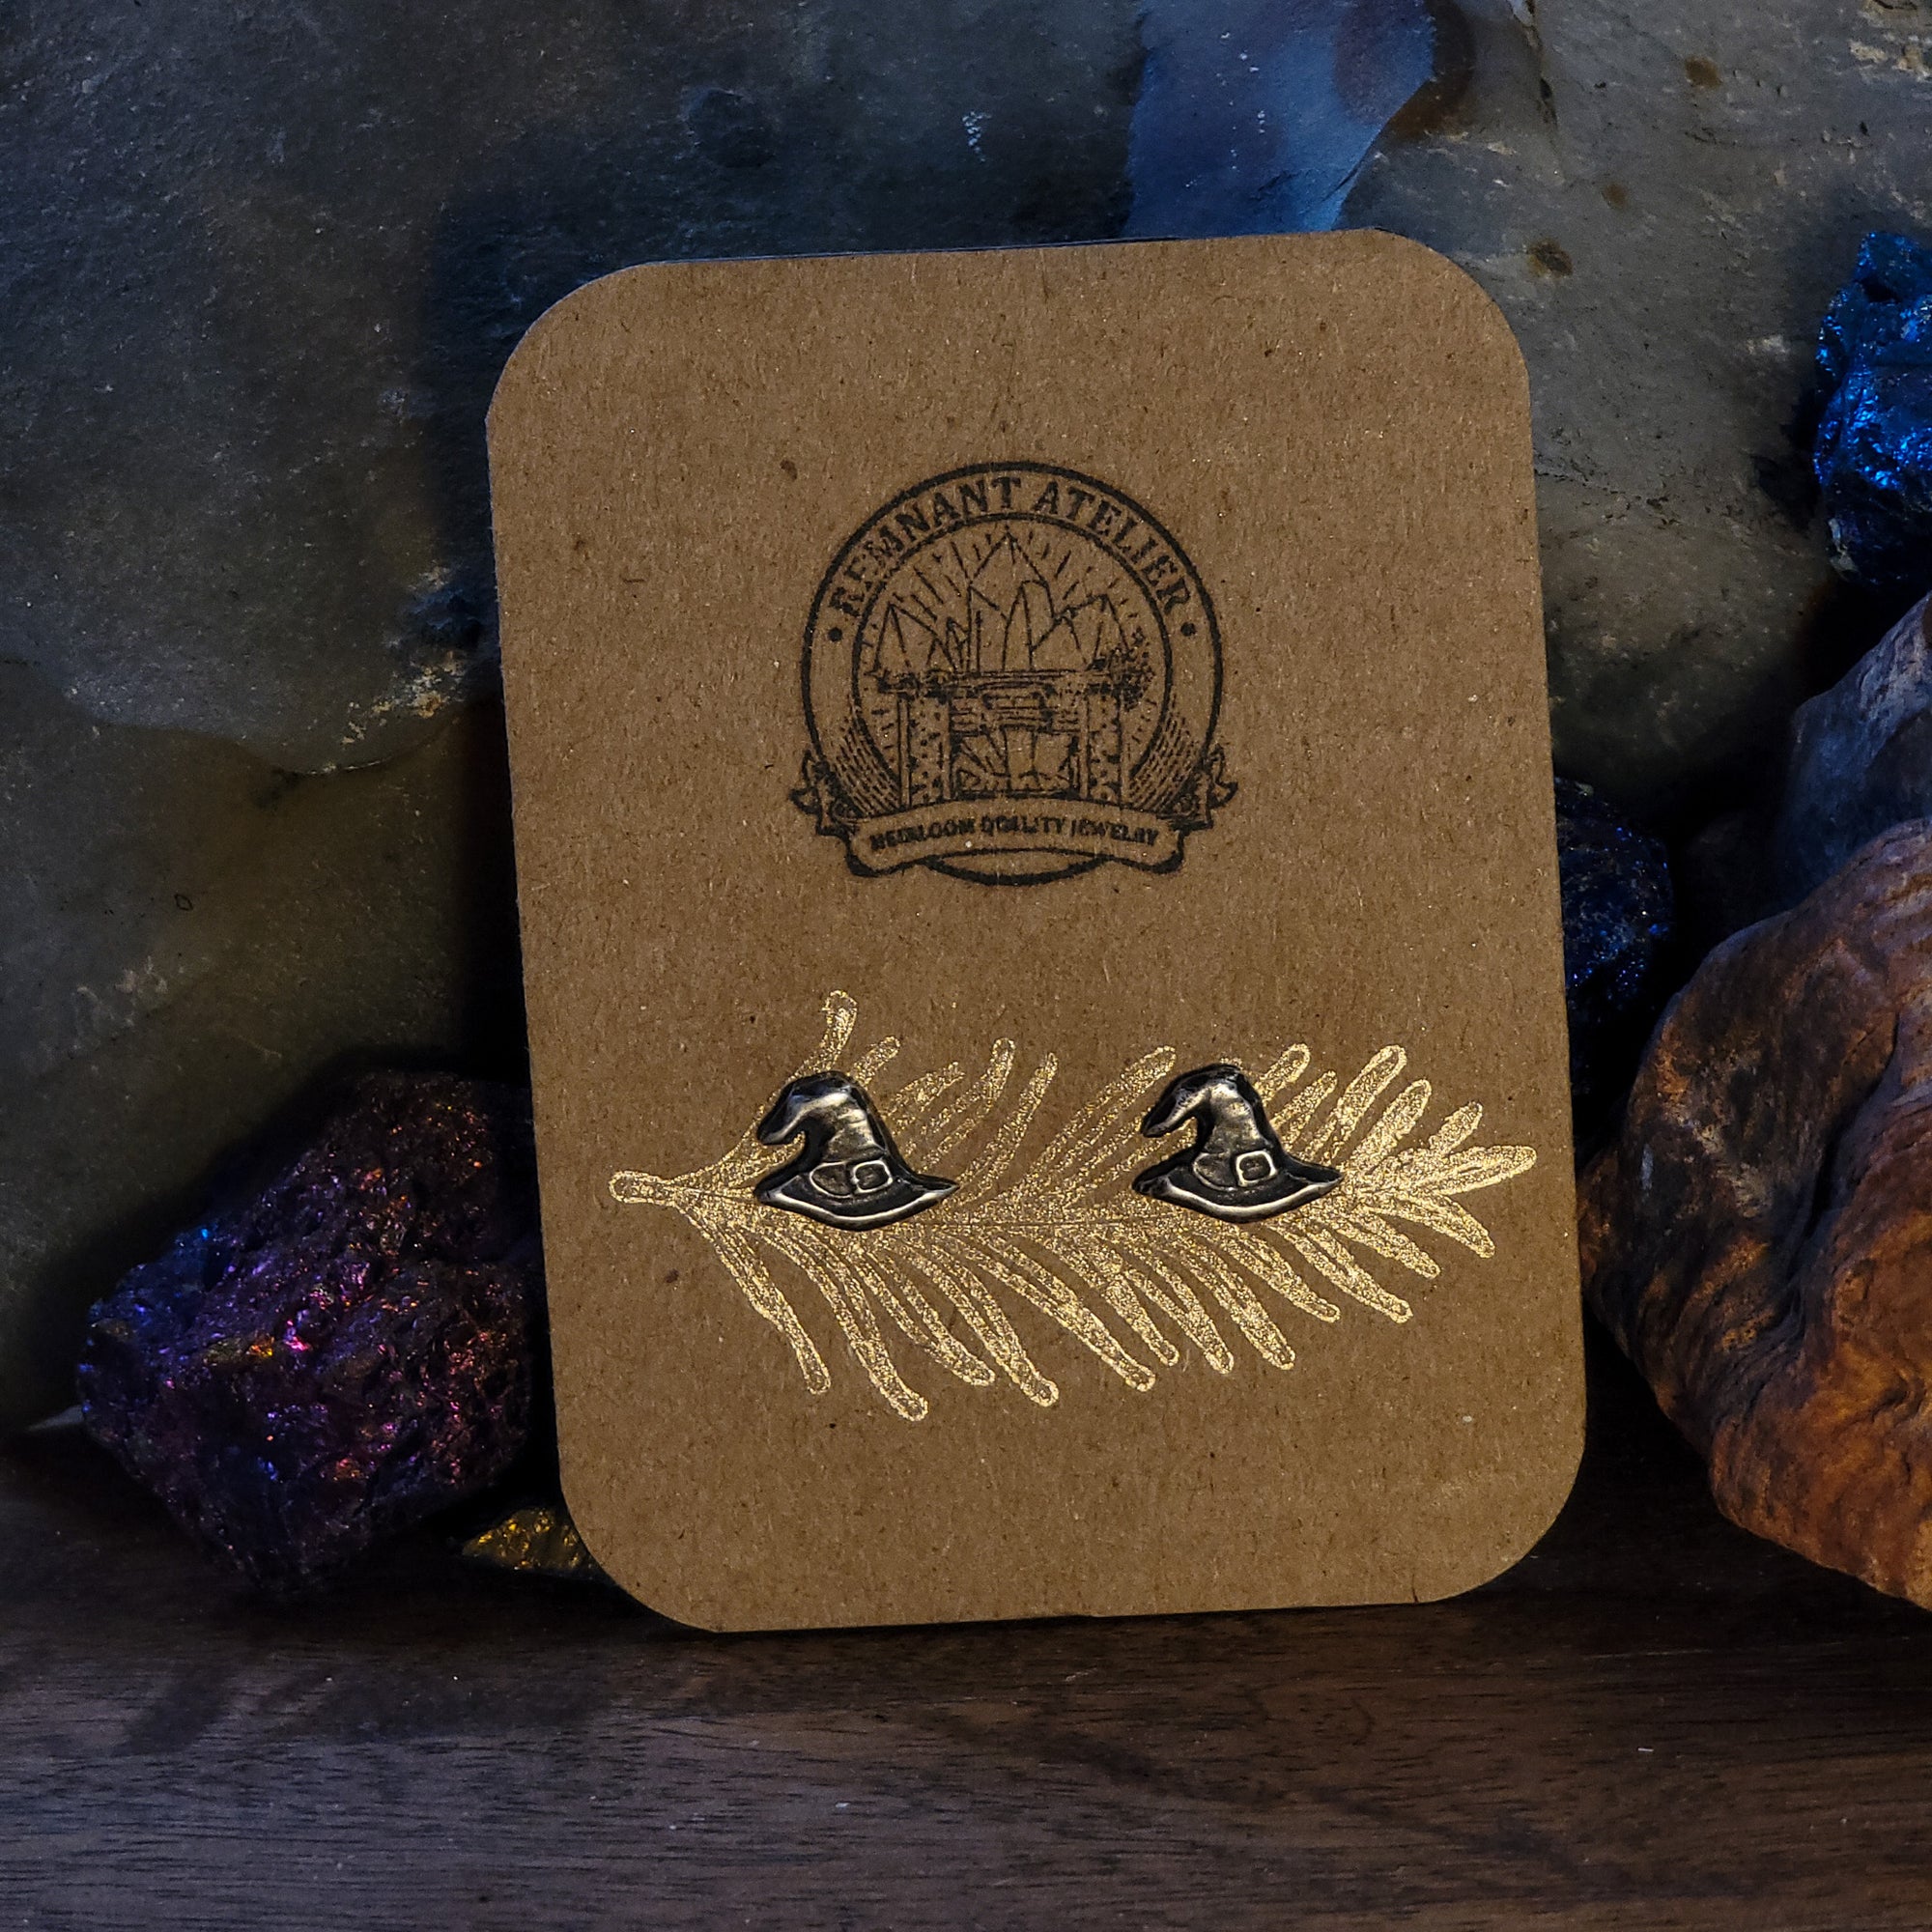 A pair of handmade sterling silver stud earrings in the shape of witch hats are displayed on a cardboard earring card, surrounded by crystals. A perfect piece of jewelry for those who love Halloween or witchy aesthetics.